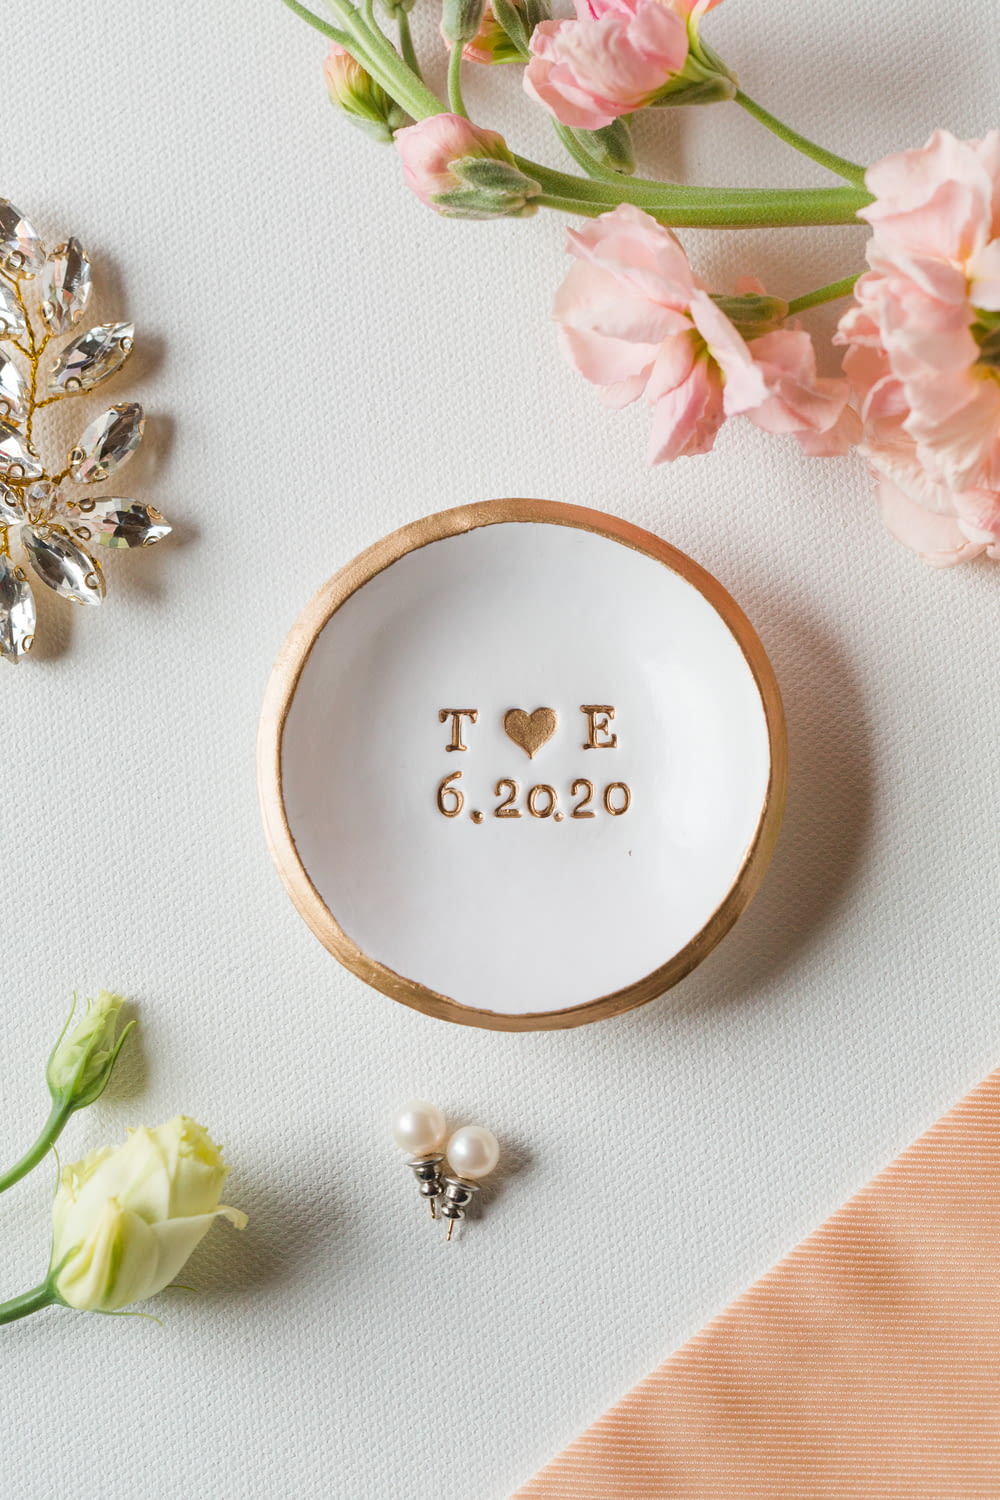 a white bowl with the word toe on it next to flowers